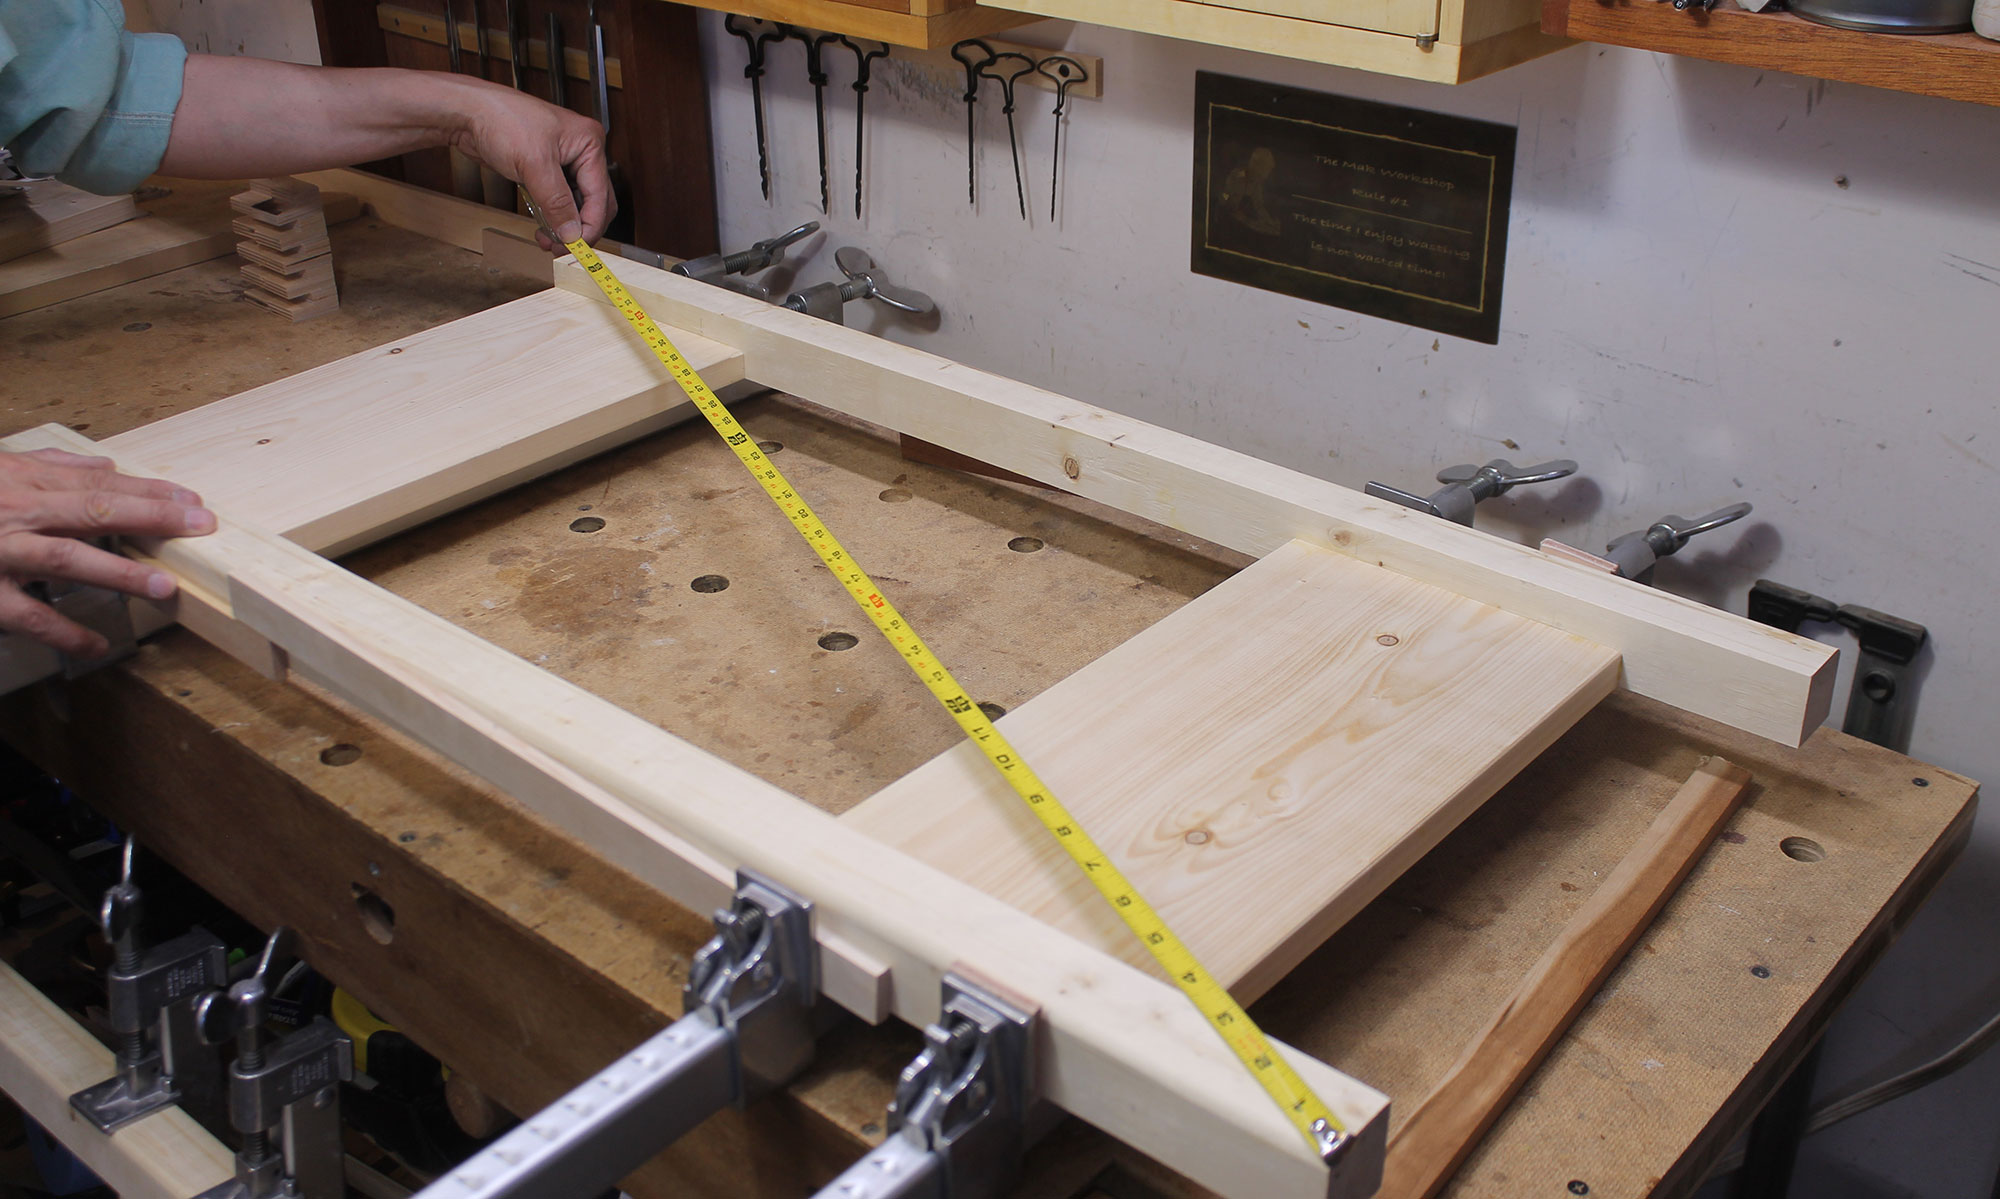 Ensuring things are square during glue up